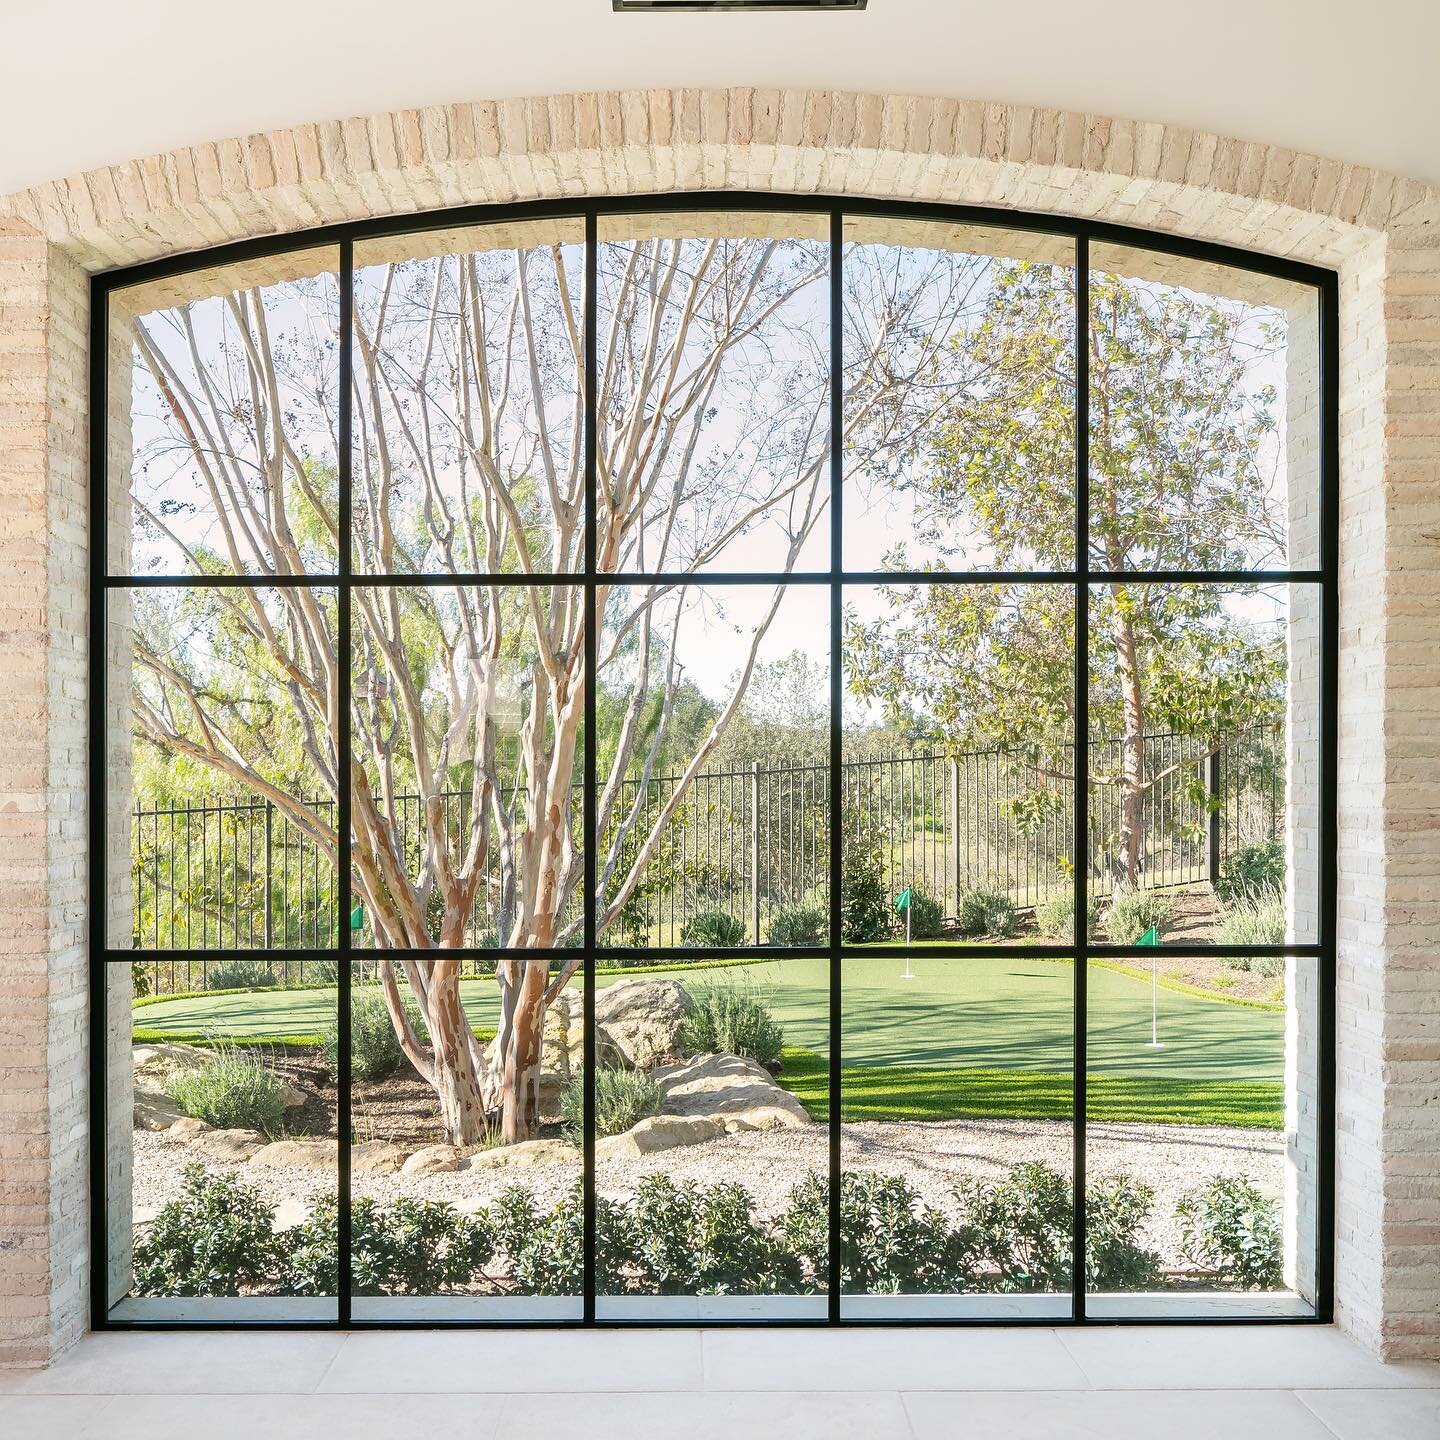 Cutting, Welding, Grinding, Metalizing, Painting, Weatherstripping, Hardware, Glazing, Testing&hellip;. Every Door and Window is a work of art. 
When you choose the right craftsman and artist you get this&hellip; 
@eurolinesteelwindows